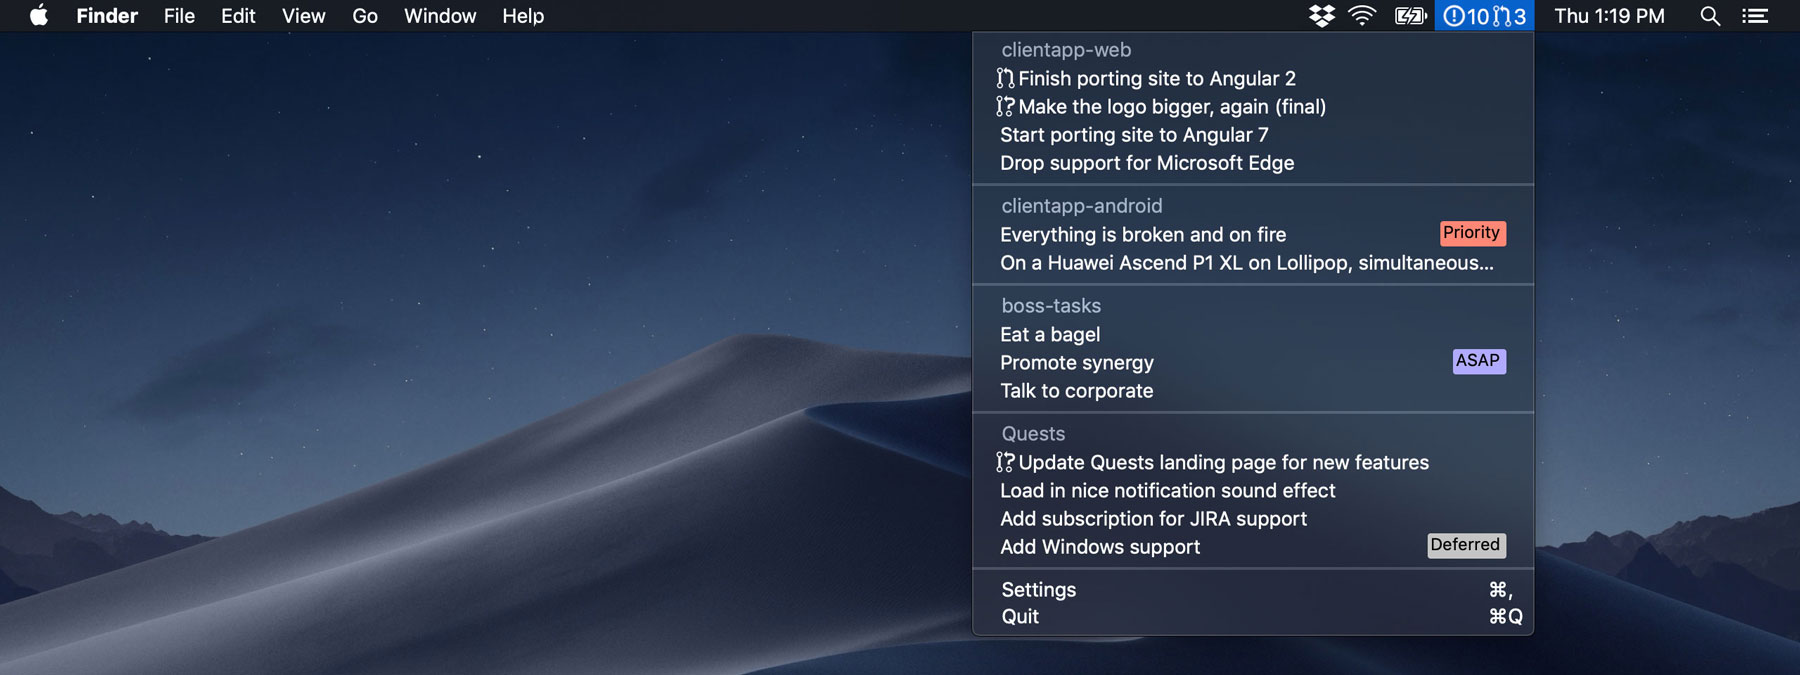 Mac homescreen featuring Quests menu bar icon with a dropdown list of active issues and pull requests